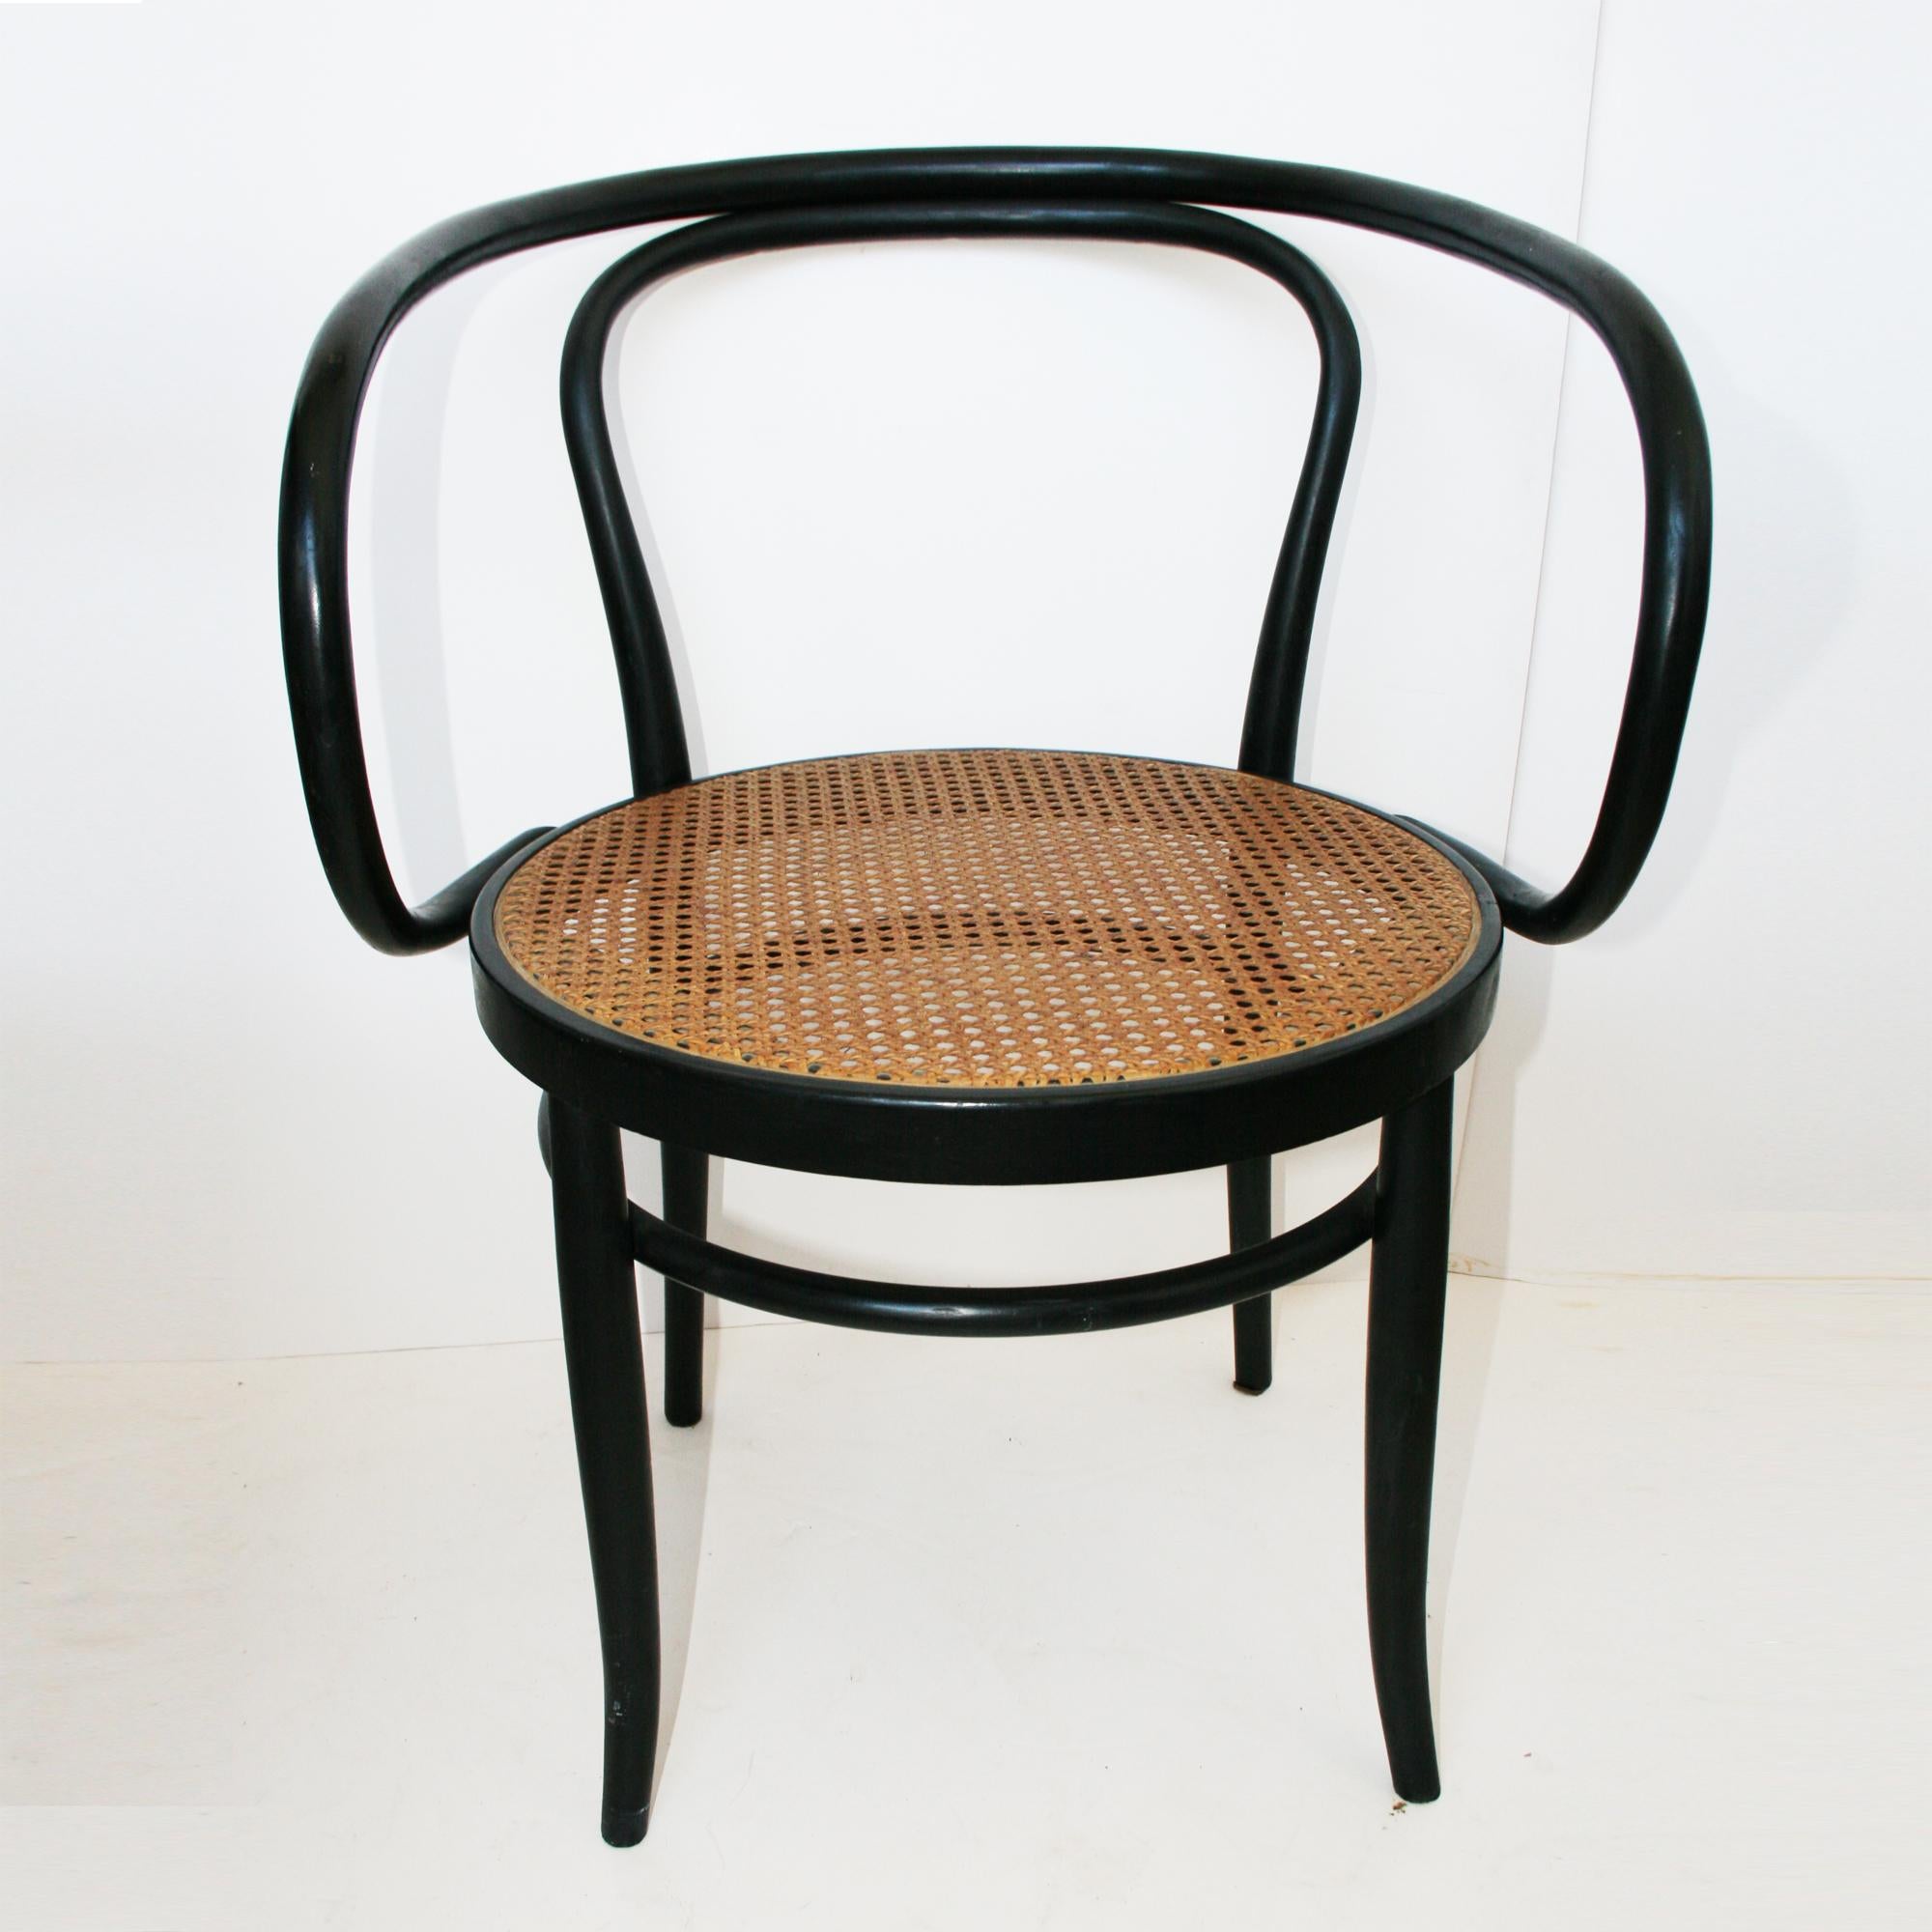 The chair after Thonet is from the years between 1955-1970. 

This is Le Corbusier's favourite chair and one of the favourite designs of architects and designers.

Unfortunately it has no label but it is in perfect condition, with minimal wear